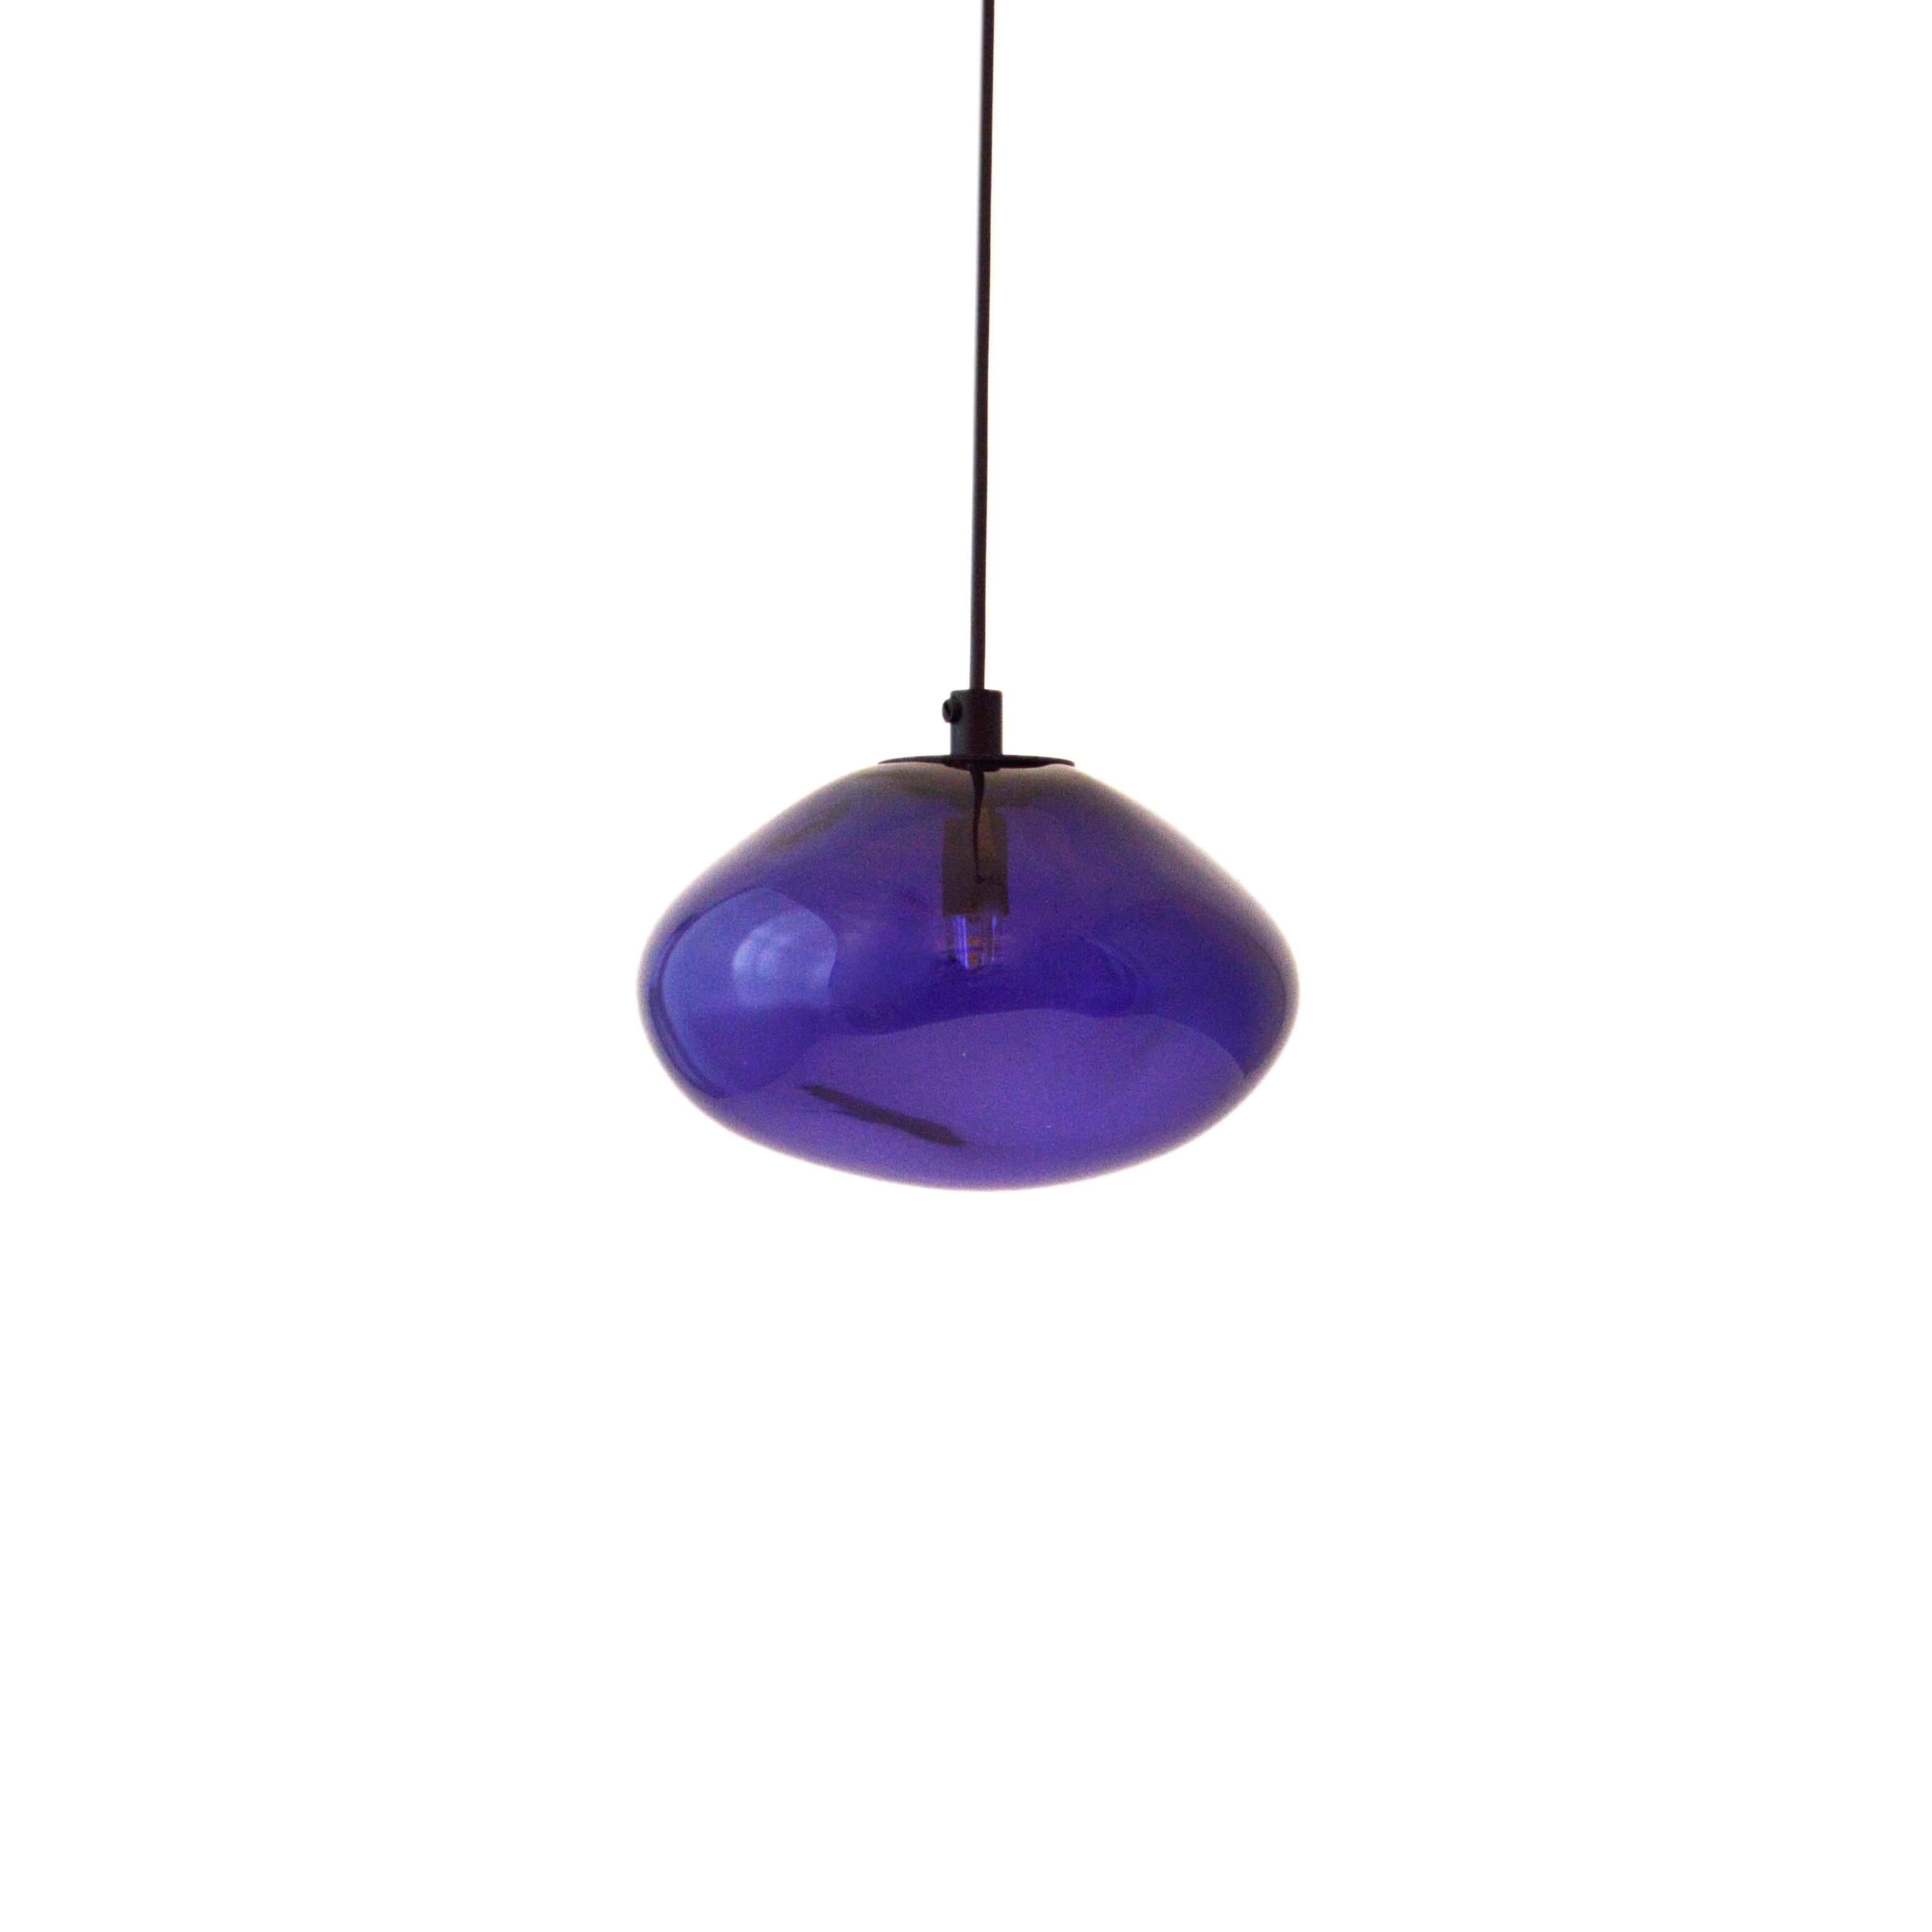 Starglow violet pendant by Eloa.
No UL listed 
Material: glass, steel, silver.
Dimensions: D 15 x W 13 x H 100 cm.
Also available in different colours and dimensions.

All our lamps can be wired according to each country. If sold to the USA it will